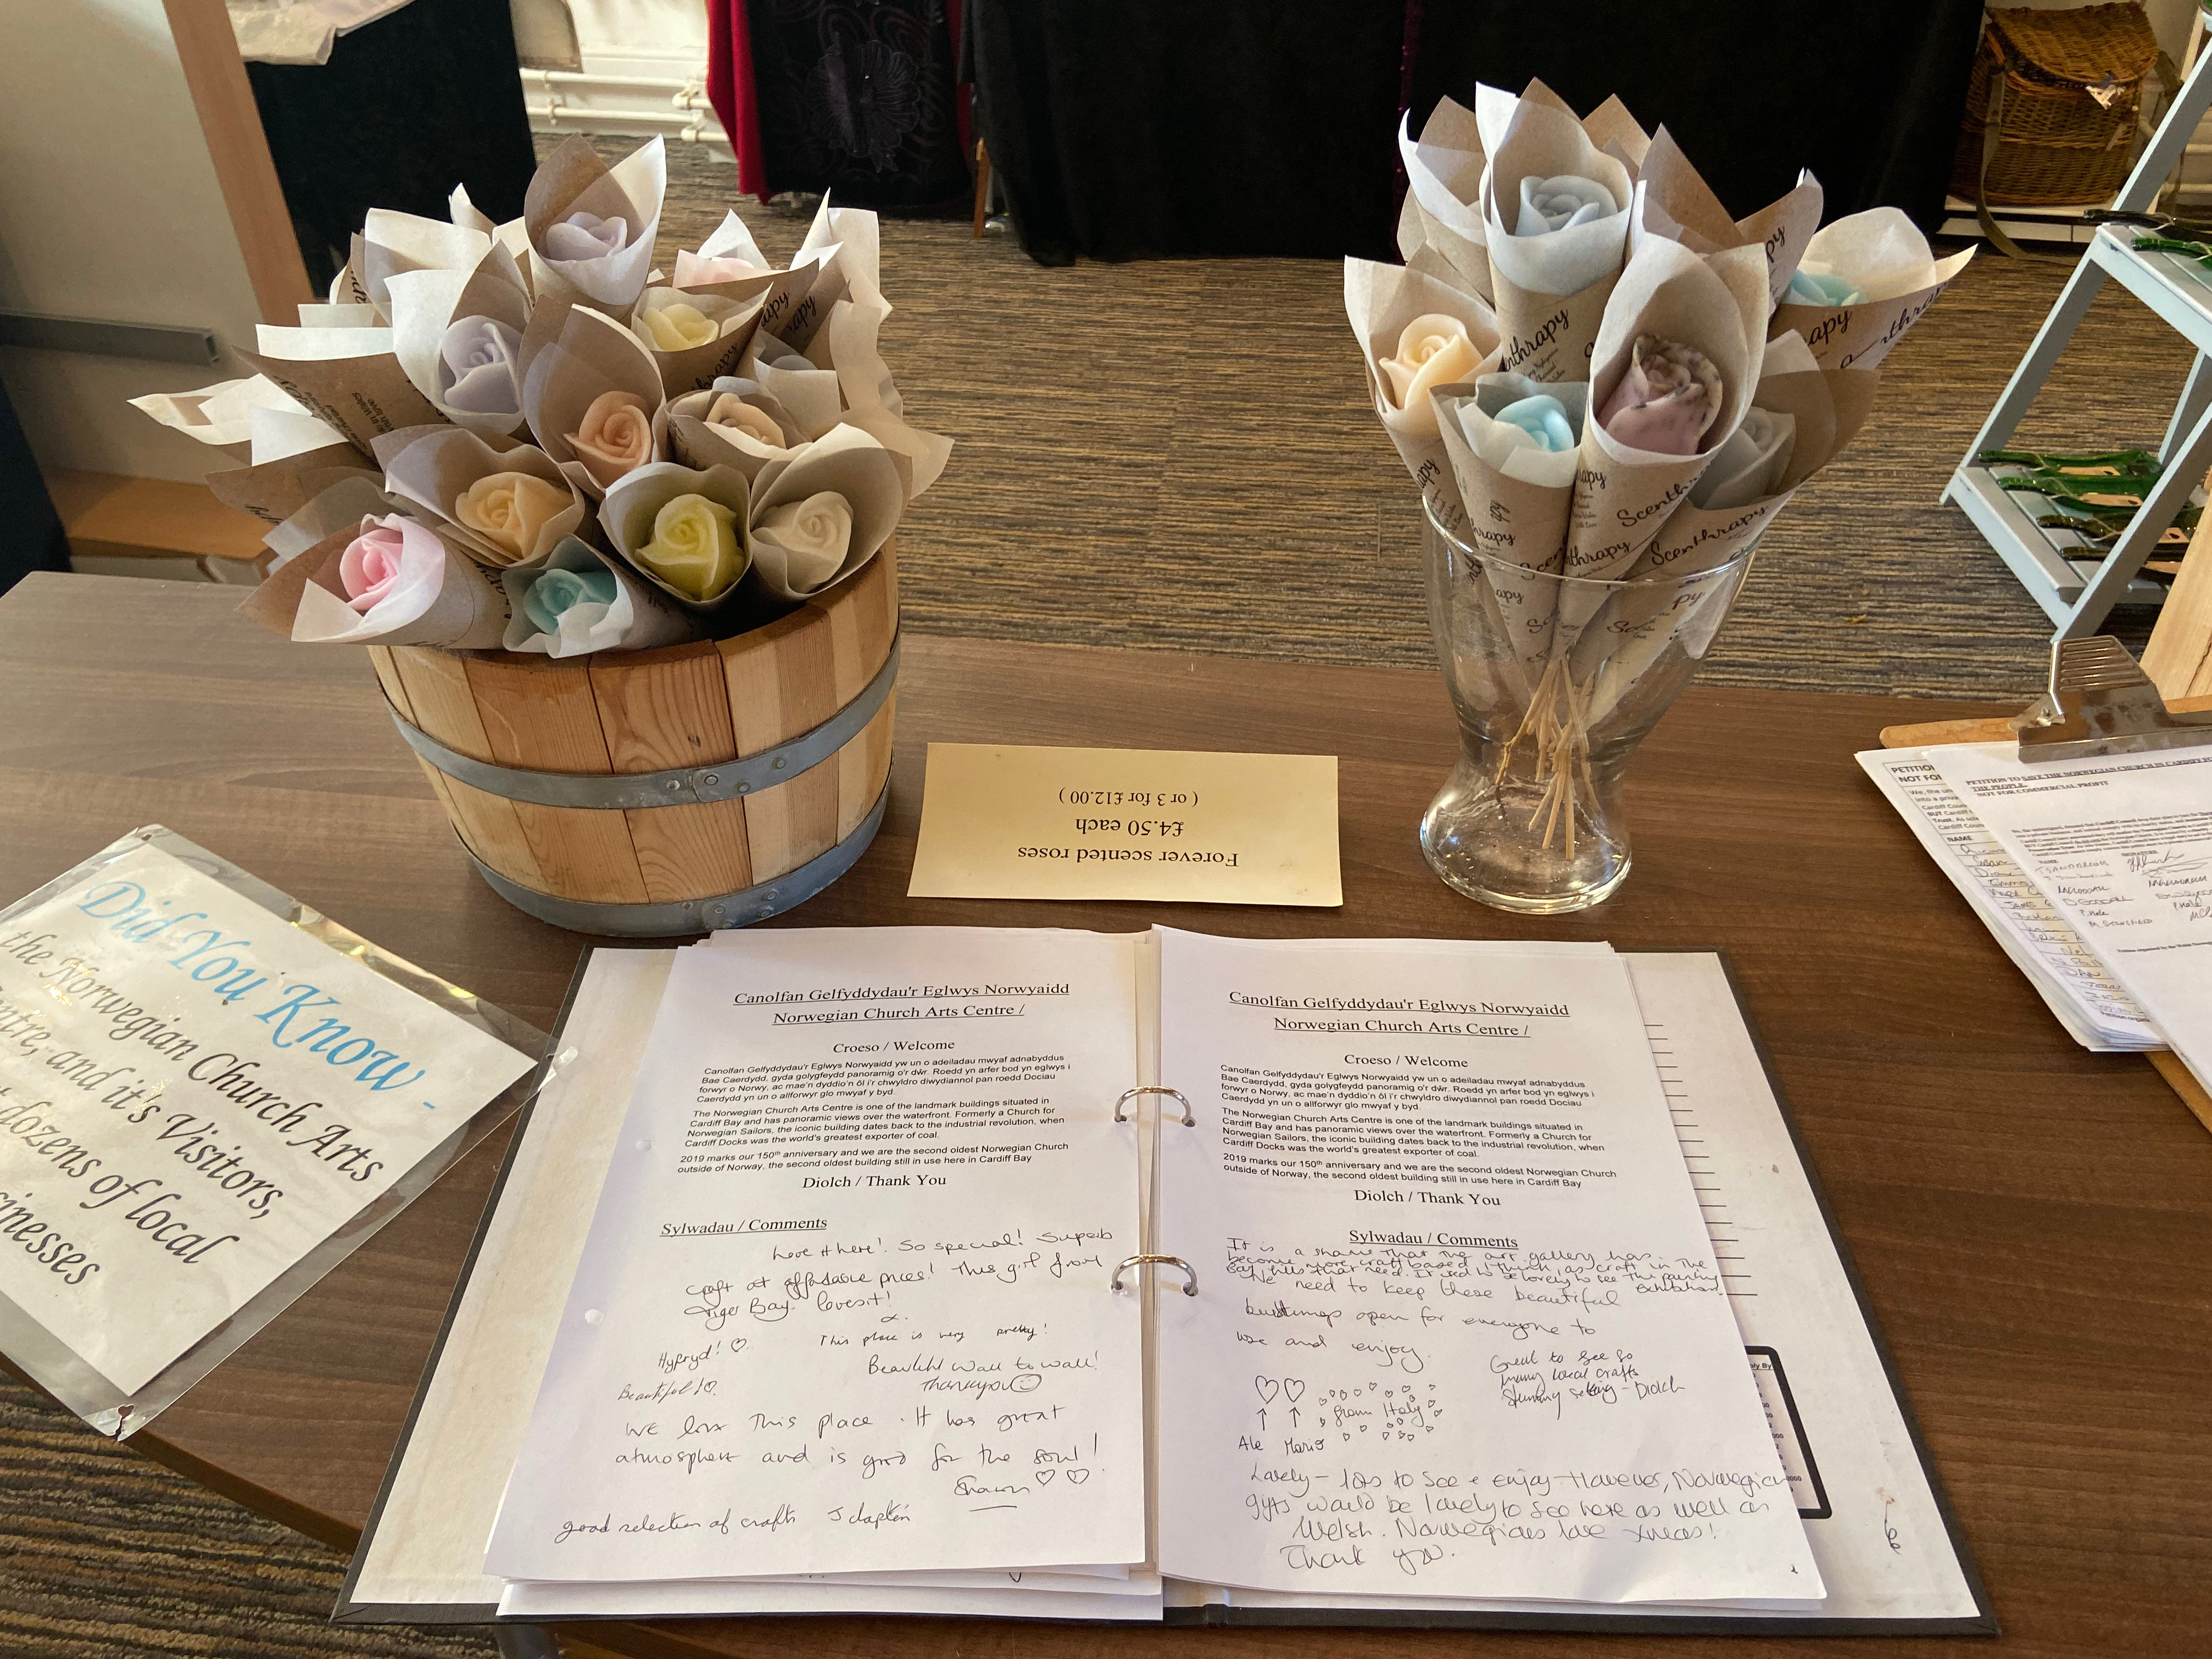 Vases of wax roses sit behind a visitor book on a wooden table. The book contains scrawled comments from visitors to the Norwegian Church Arts Centre